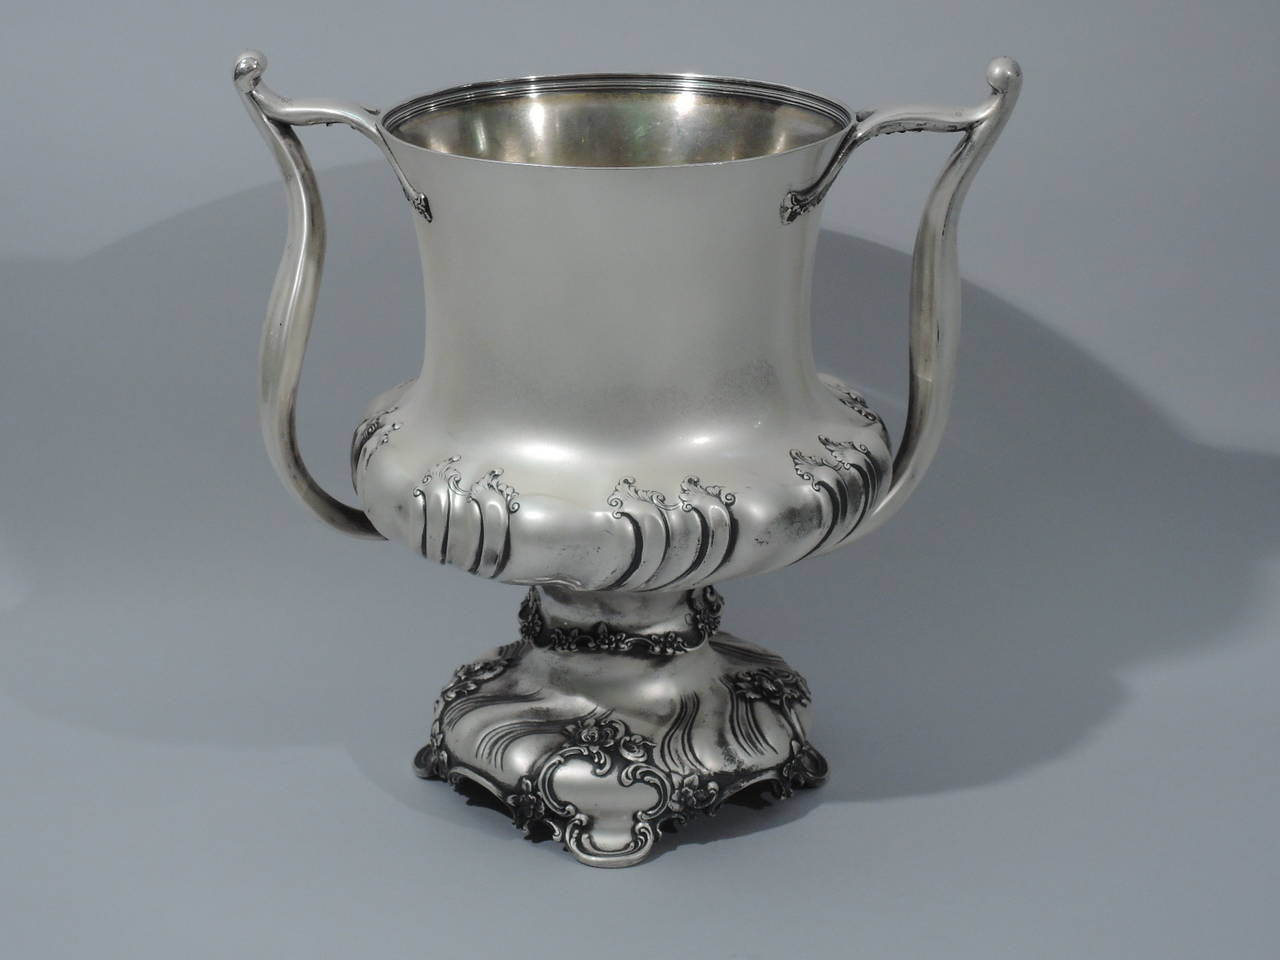 Sterling silver trophy cup. Made by Tiffany & Co. in New York, ca 1893. Squat bowl, raised foot on four C-scrolls, and flared rim. Twisted gadrooning to bowl and foot. Sinuous side handles, splayed at top with flowers and foliage. Gilt interior. A